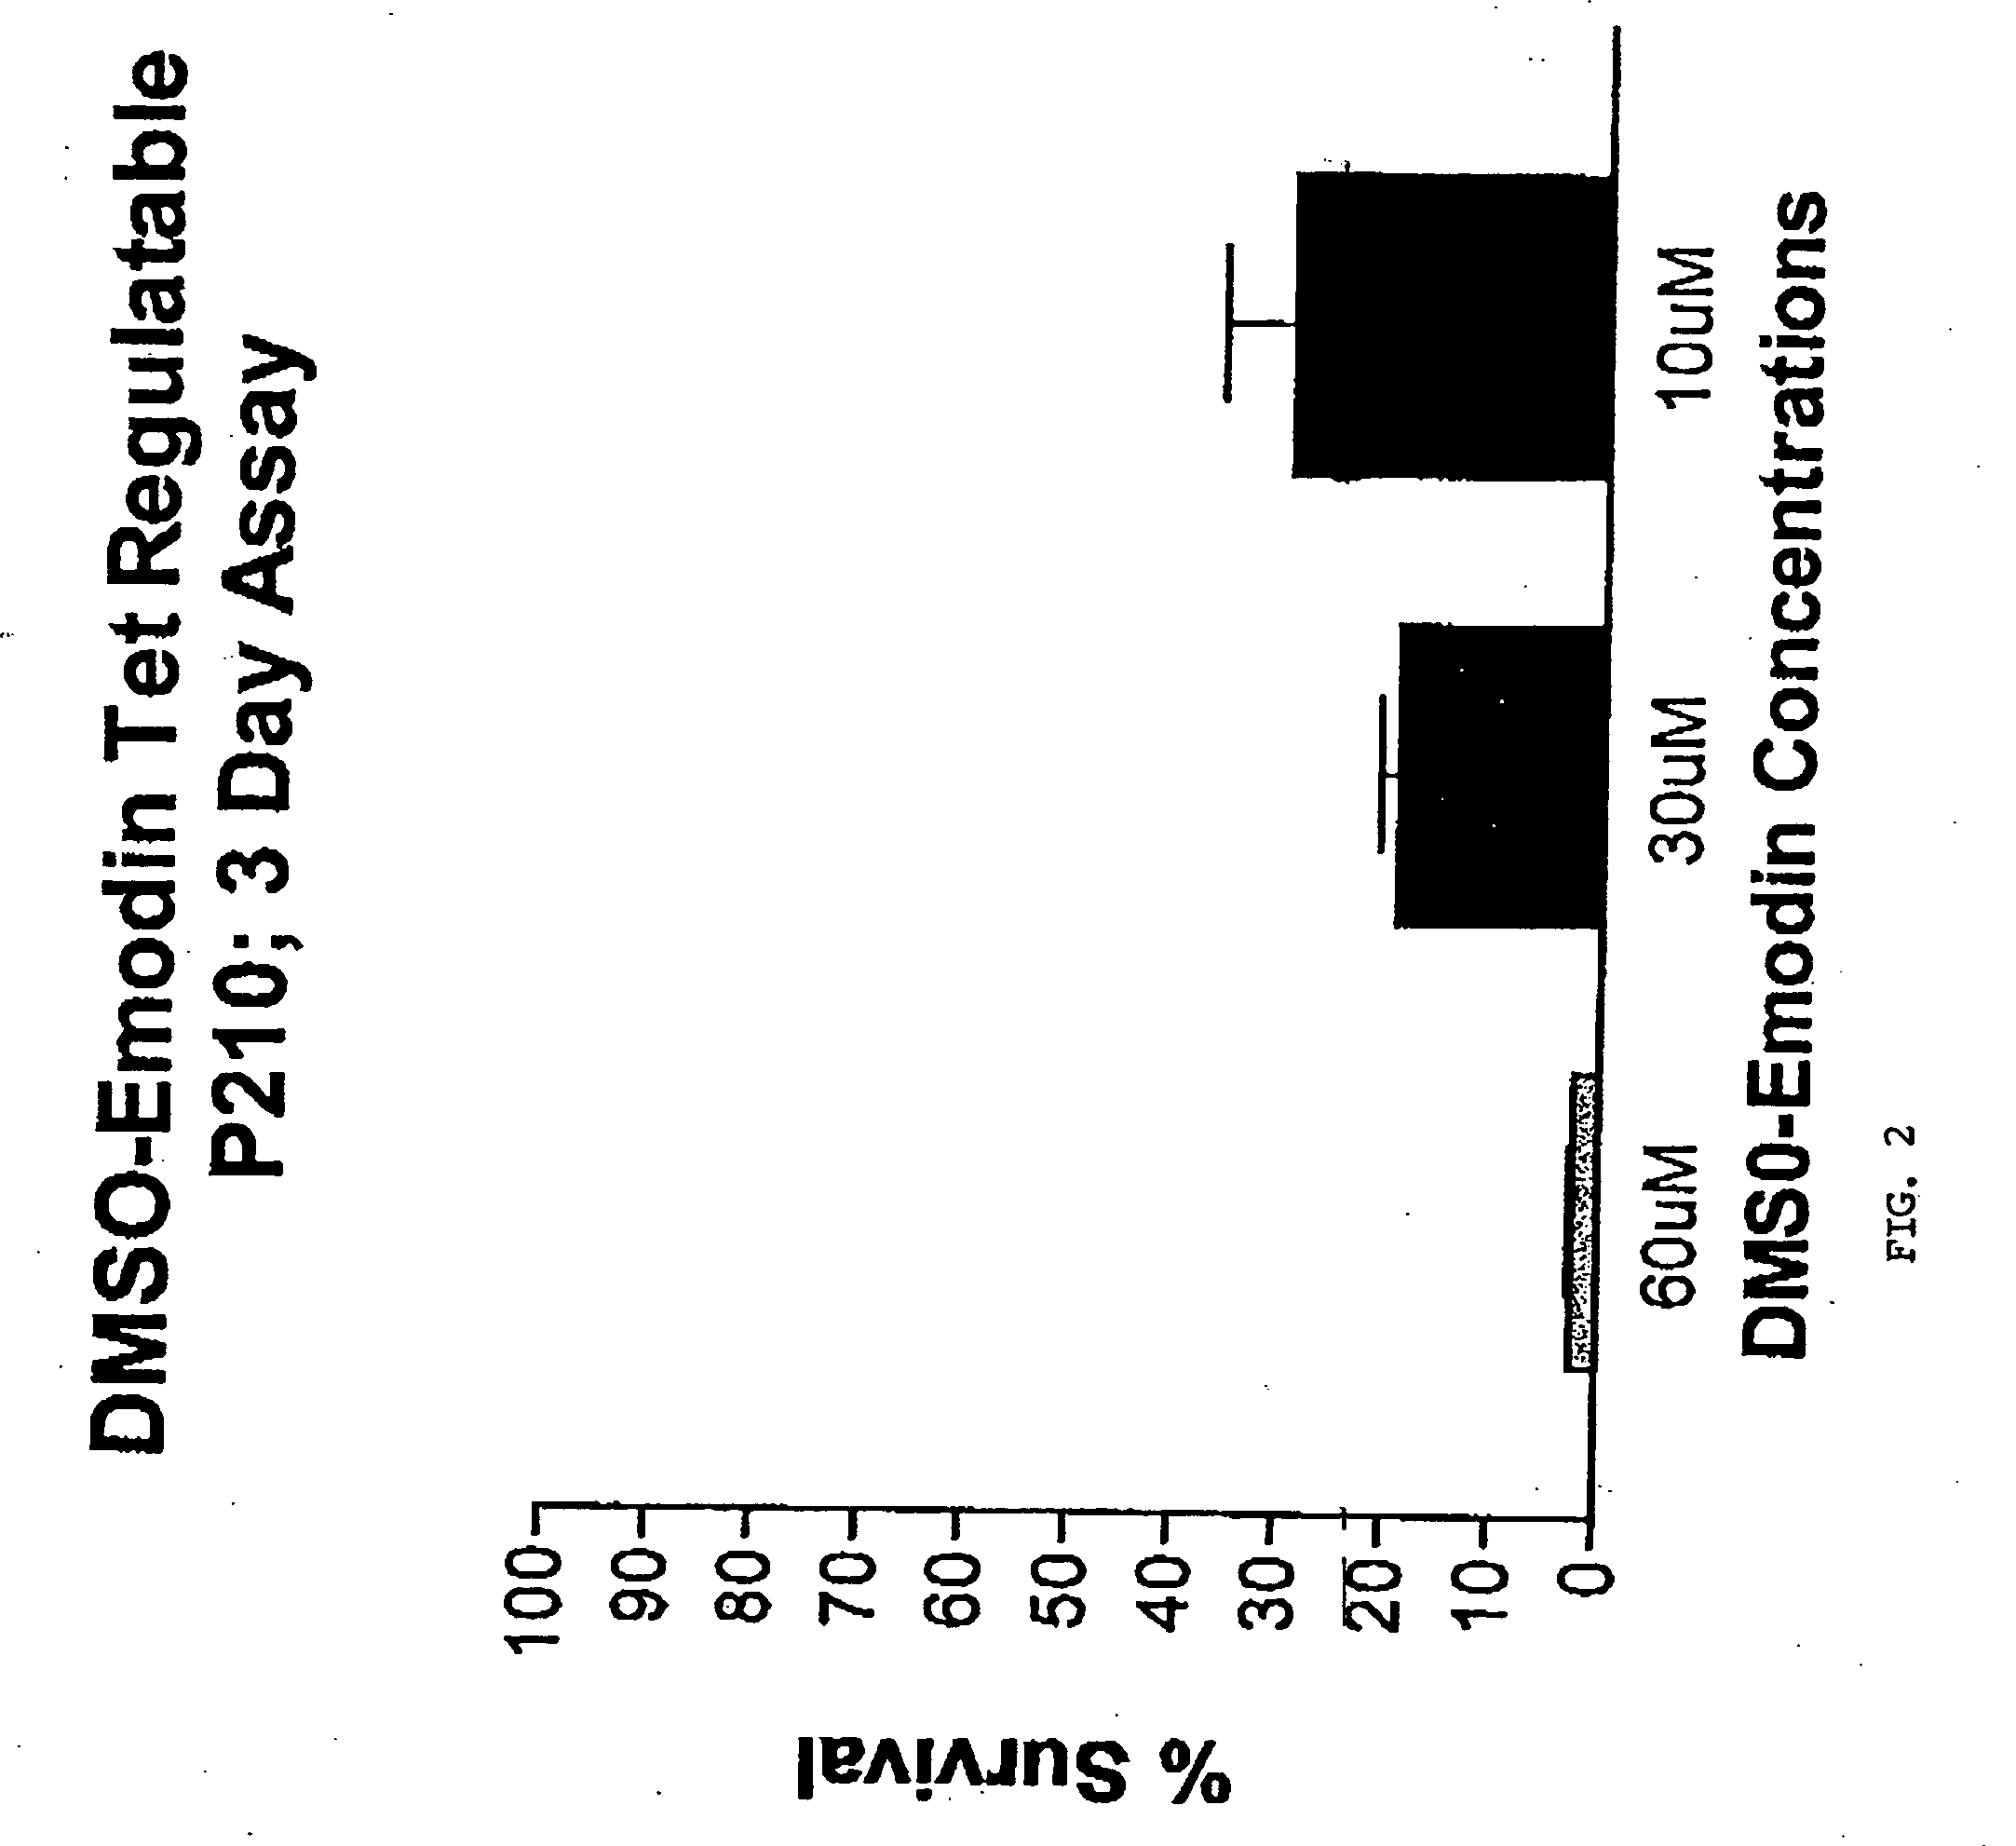 Compositions and methods related to lipid:emodin formulations